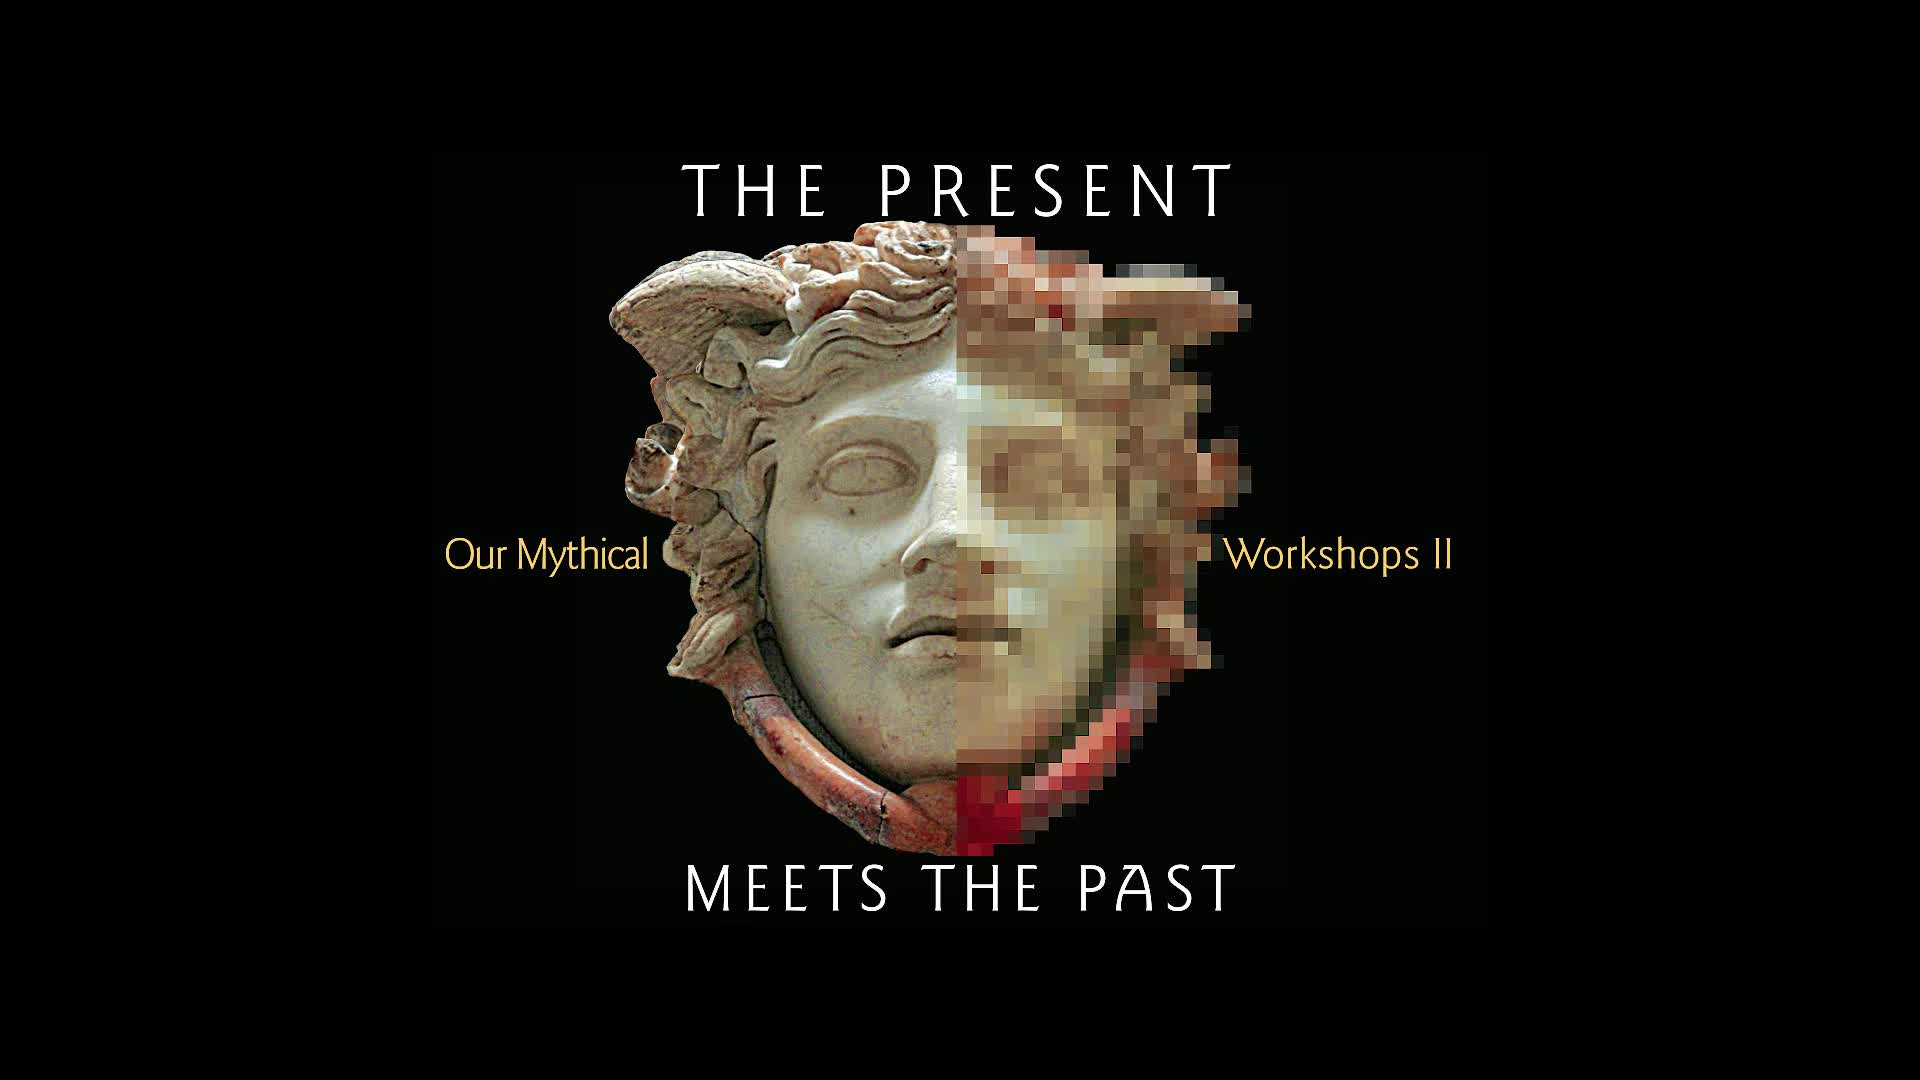  Our Mythical History. The present meets the past - International Conference